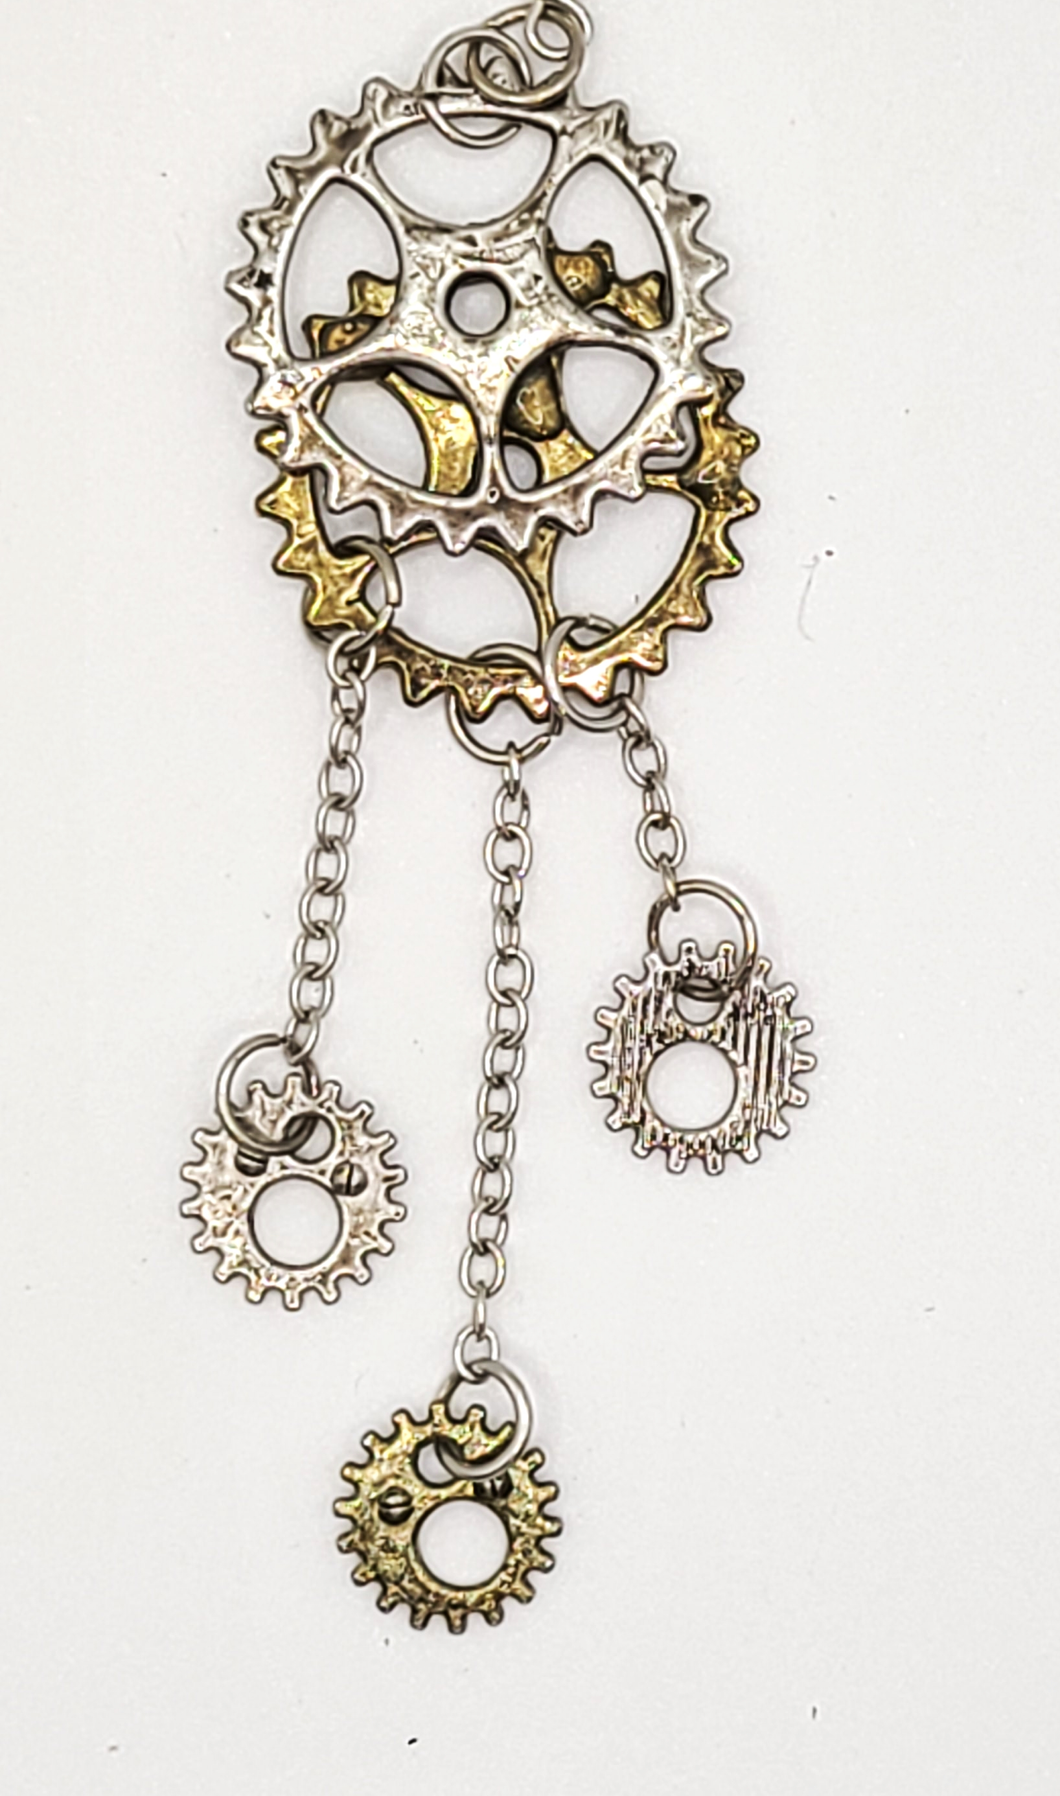 Vintage, Steampunk and Gothic Charms